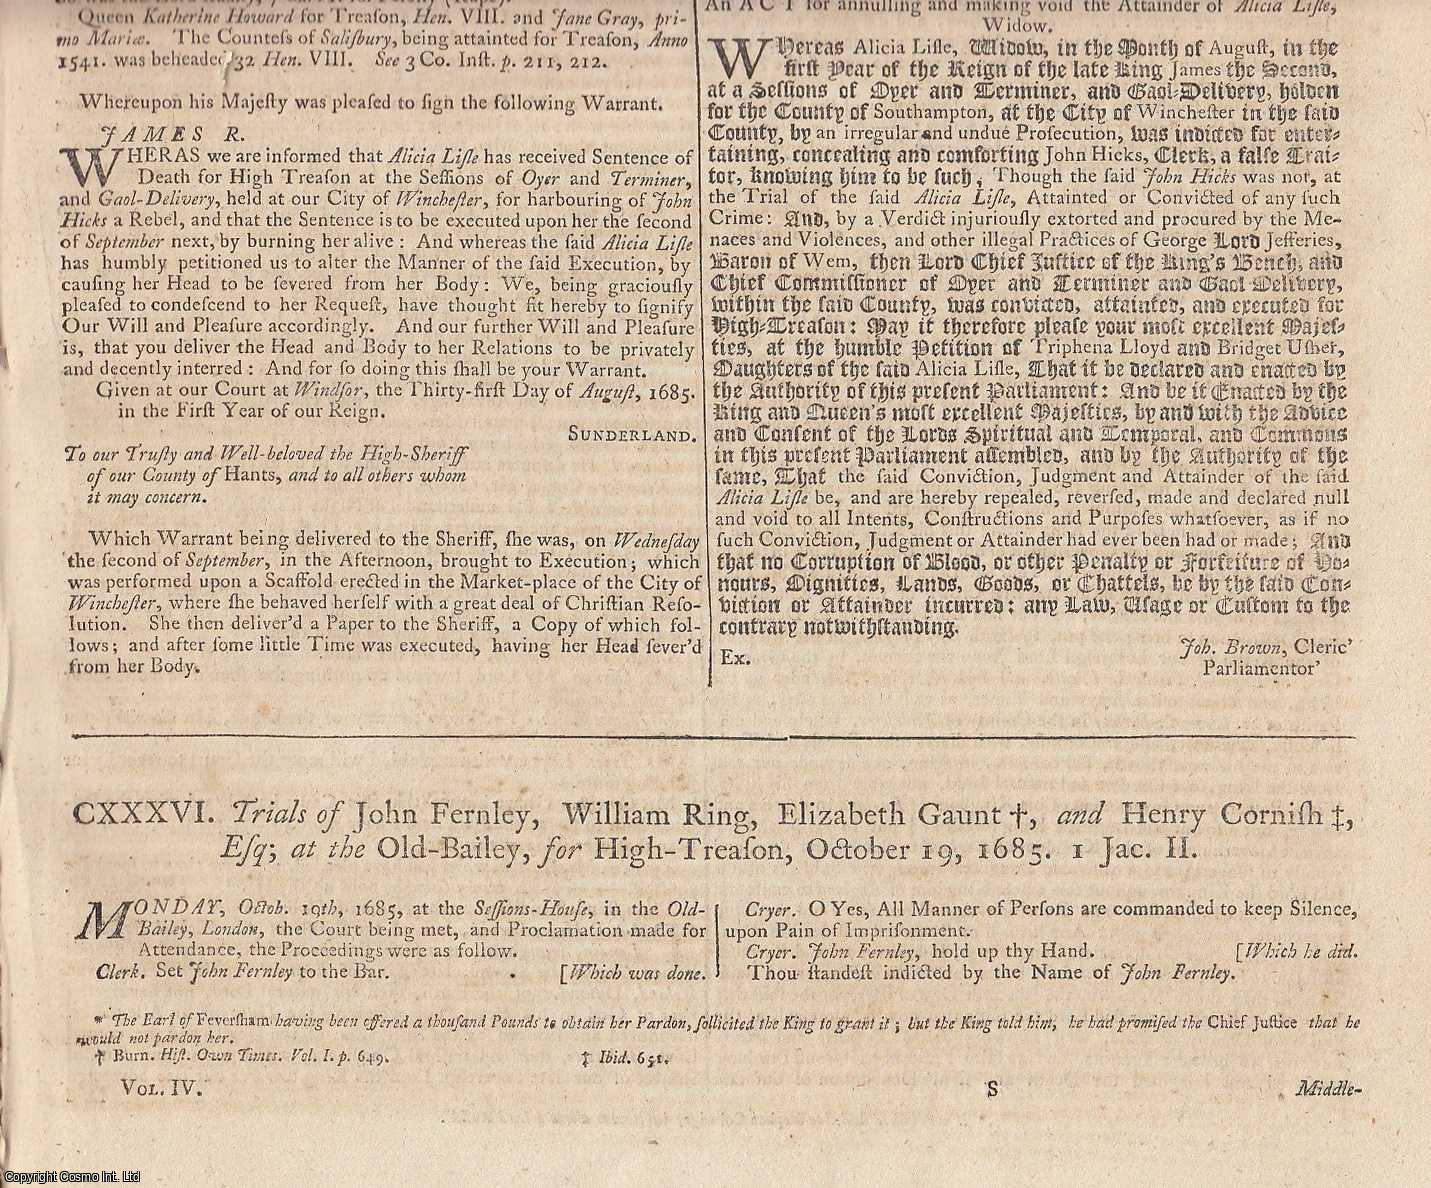 [Trial] - RYE HOUSE PLOT. The Trials of John Fernley, William Ring, Elizabeth Gaunt, and Henry Cornish Esq., at the Old Bailey, for High Treason, October 19, 1685 ALONG WITH The Trial of Charles Bateman, Surgeon, at the Old Bailey, for High Treason, December 9 1685. An original article from the Collected State Trials.